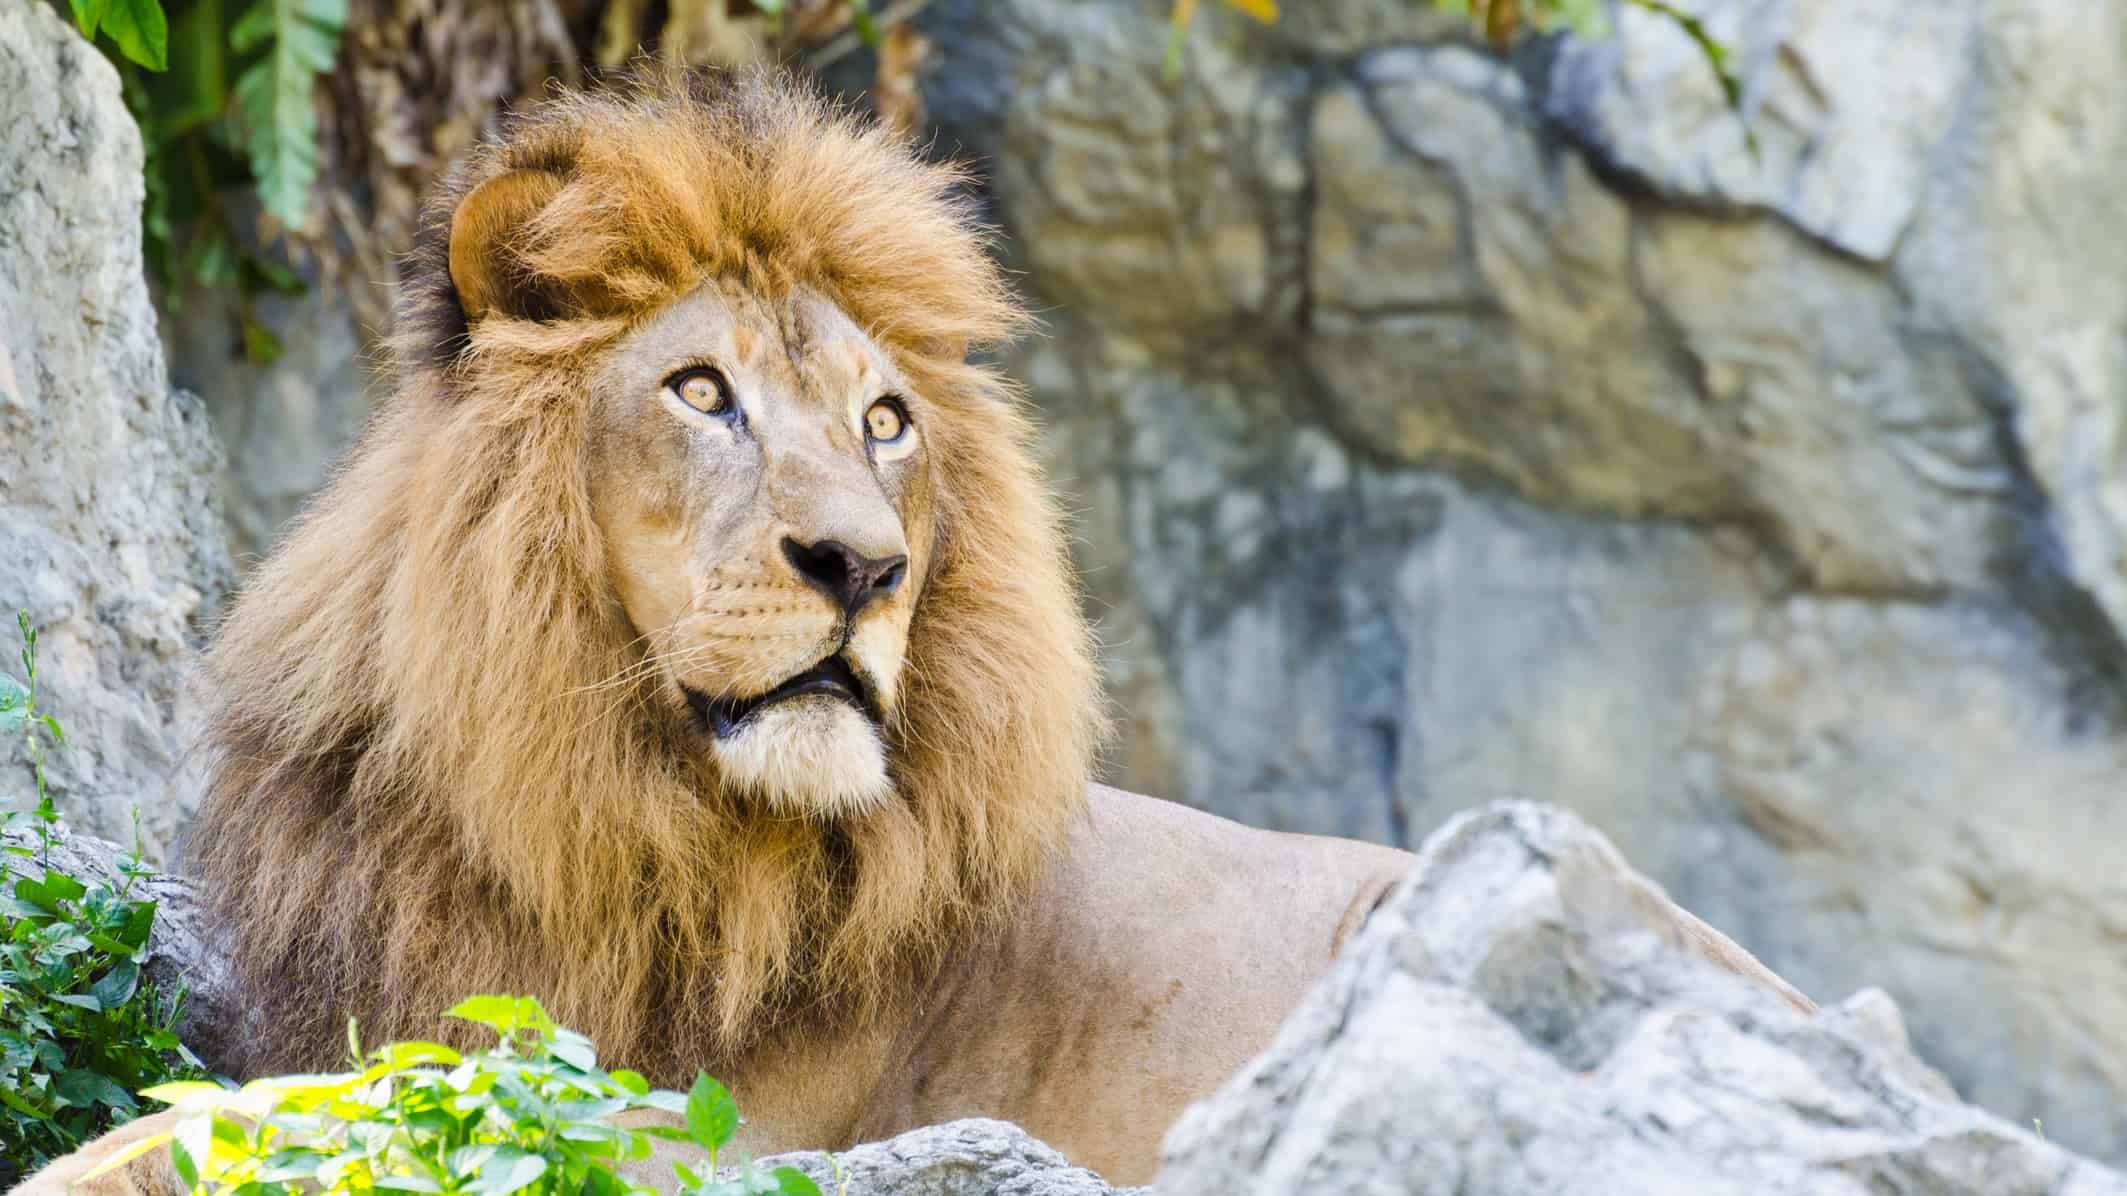 A male lion with a large mane sits atop a rocky mountain outcrop surveying the view, representing the outlook for the Liontown share price in FY23